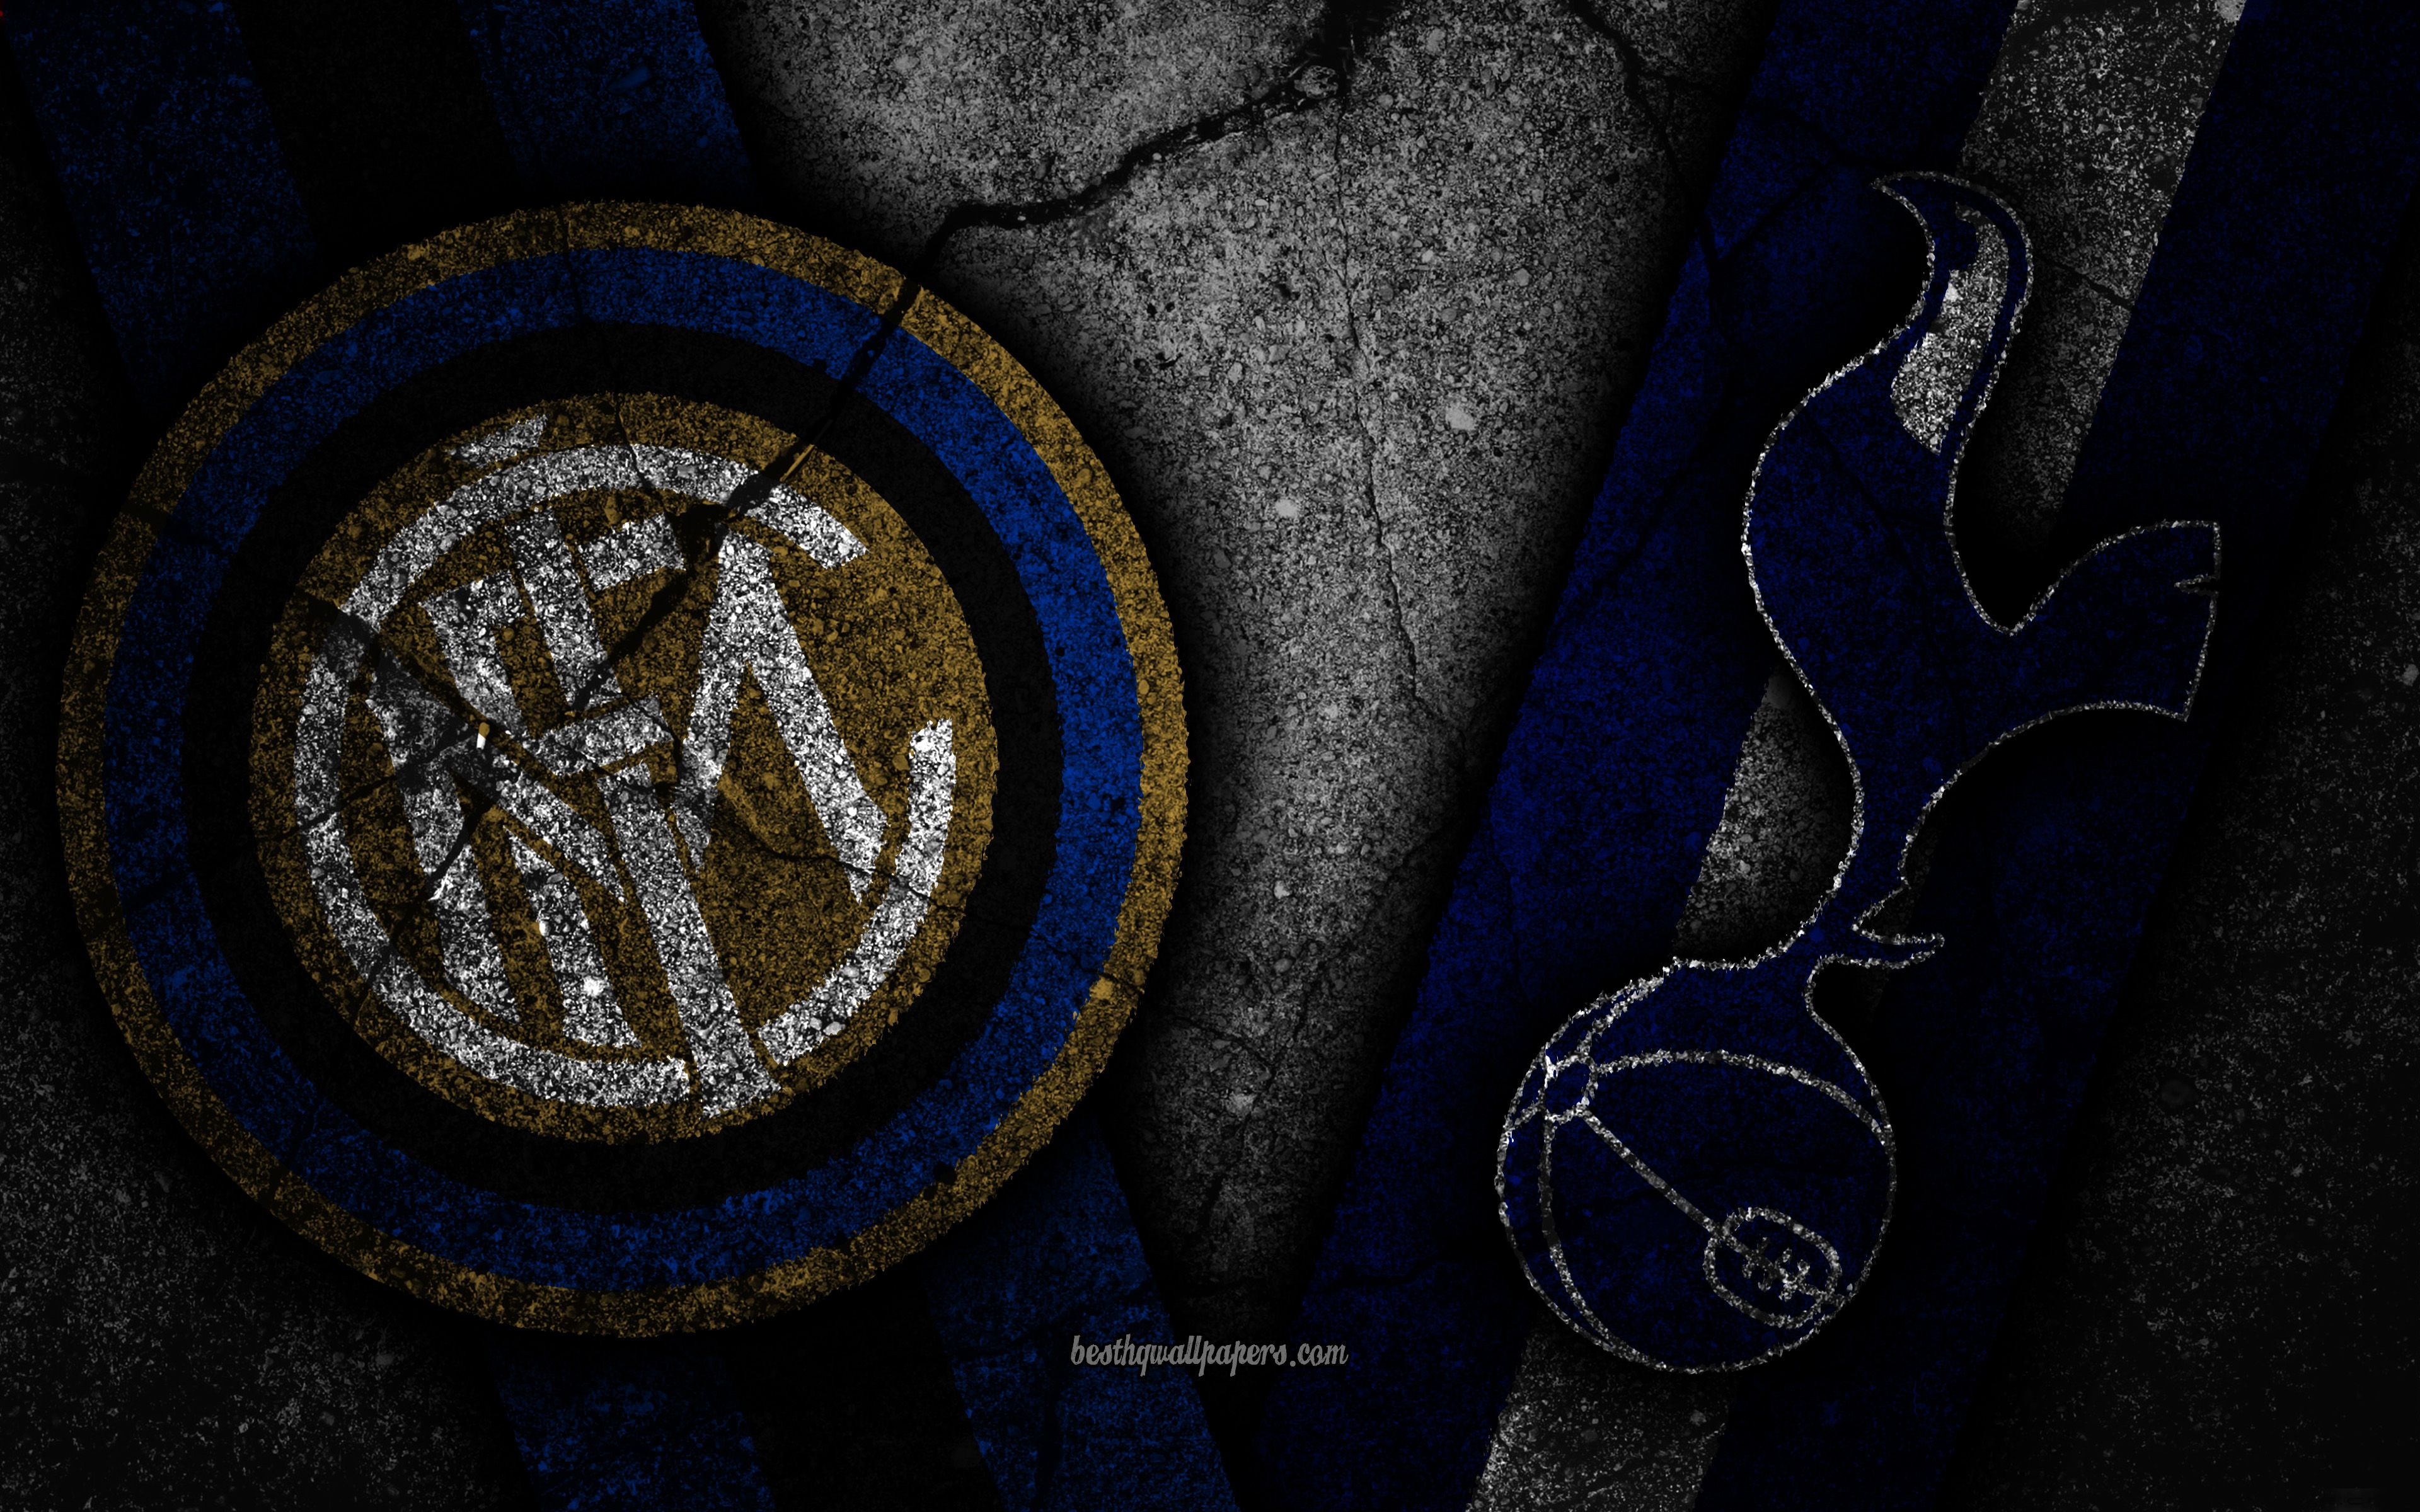 Download wallpaper Inter Milan vs Tottenham, 4k, Champions League, Group Stage, Round creative, Internazionale FC, Tottenham Hotspur FC, black stone for desktop with resolution 3840x2400. High Quality HD picture wallpaper